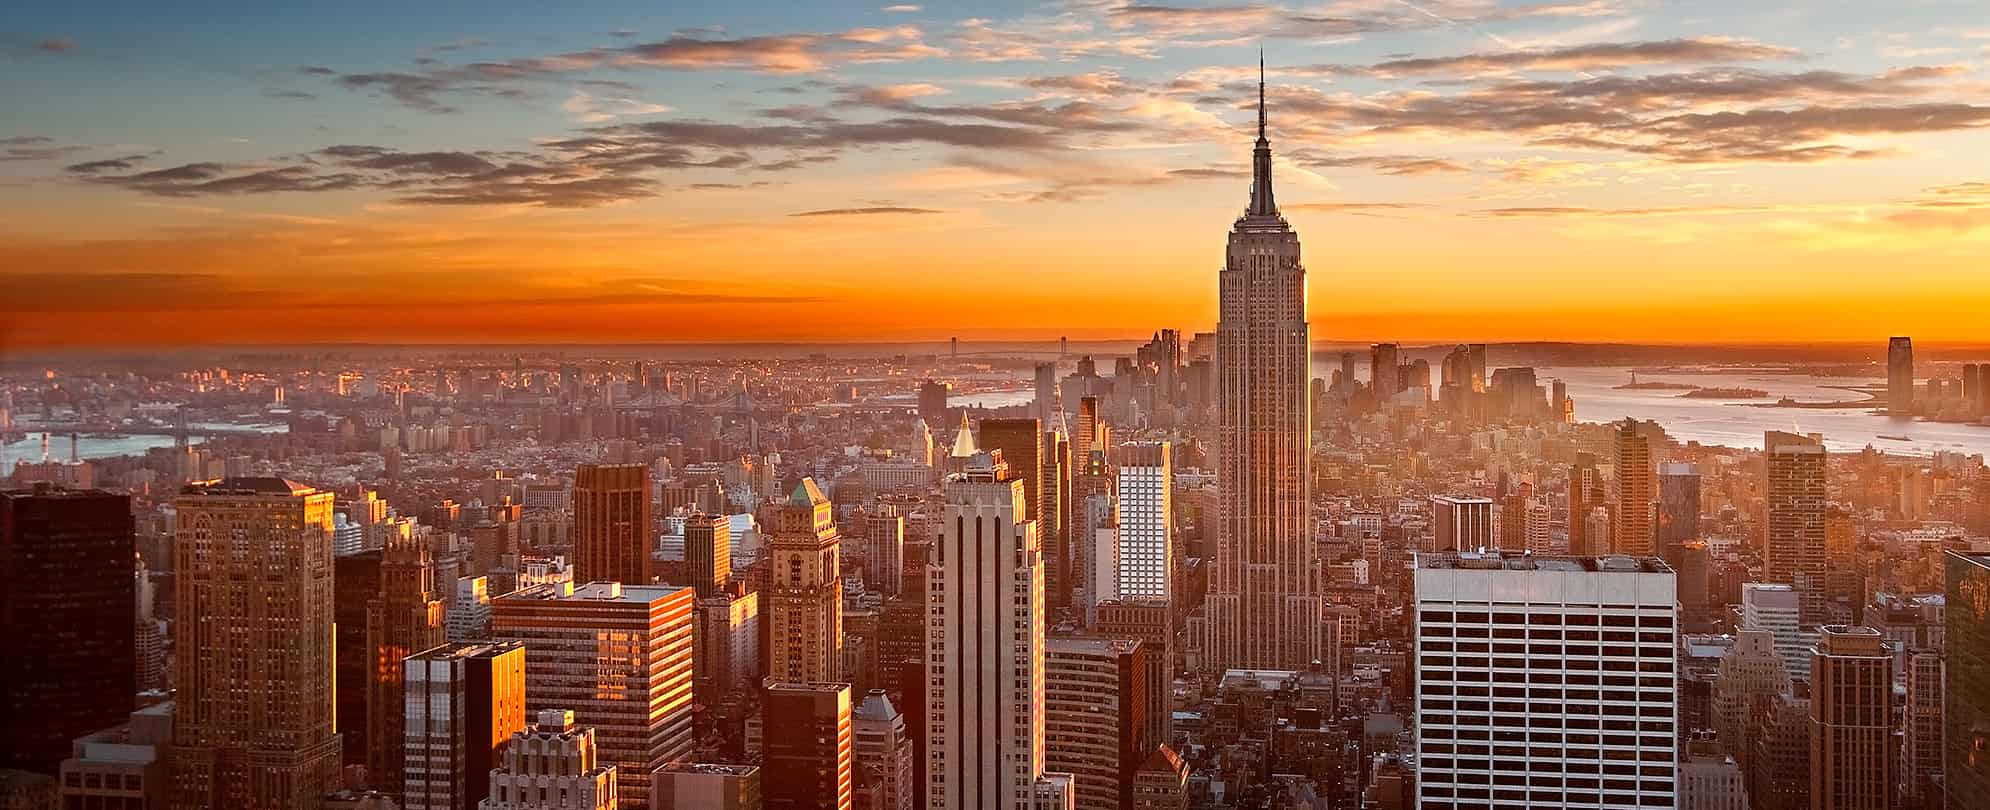 Birds eye sunset view of the Empire state Building in New York City, New York